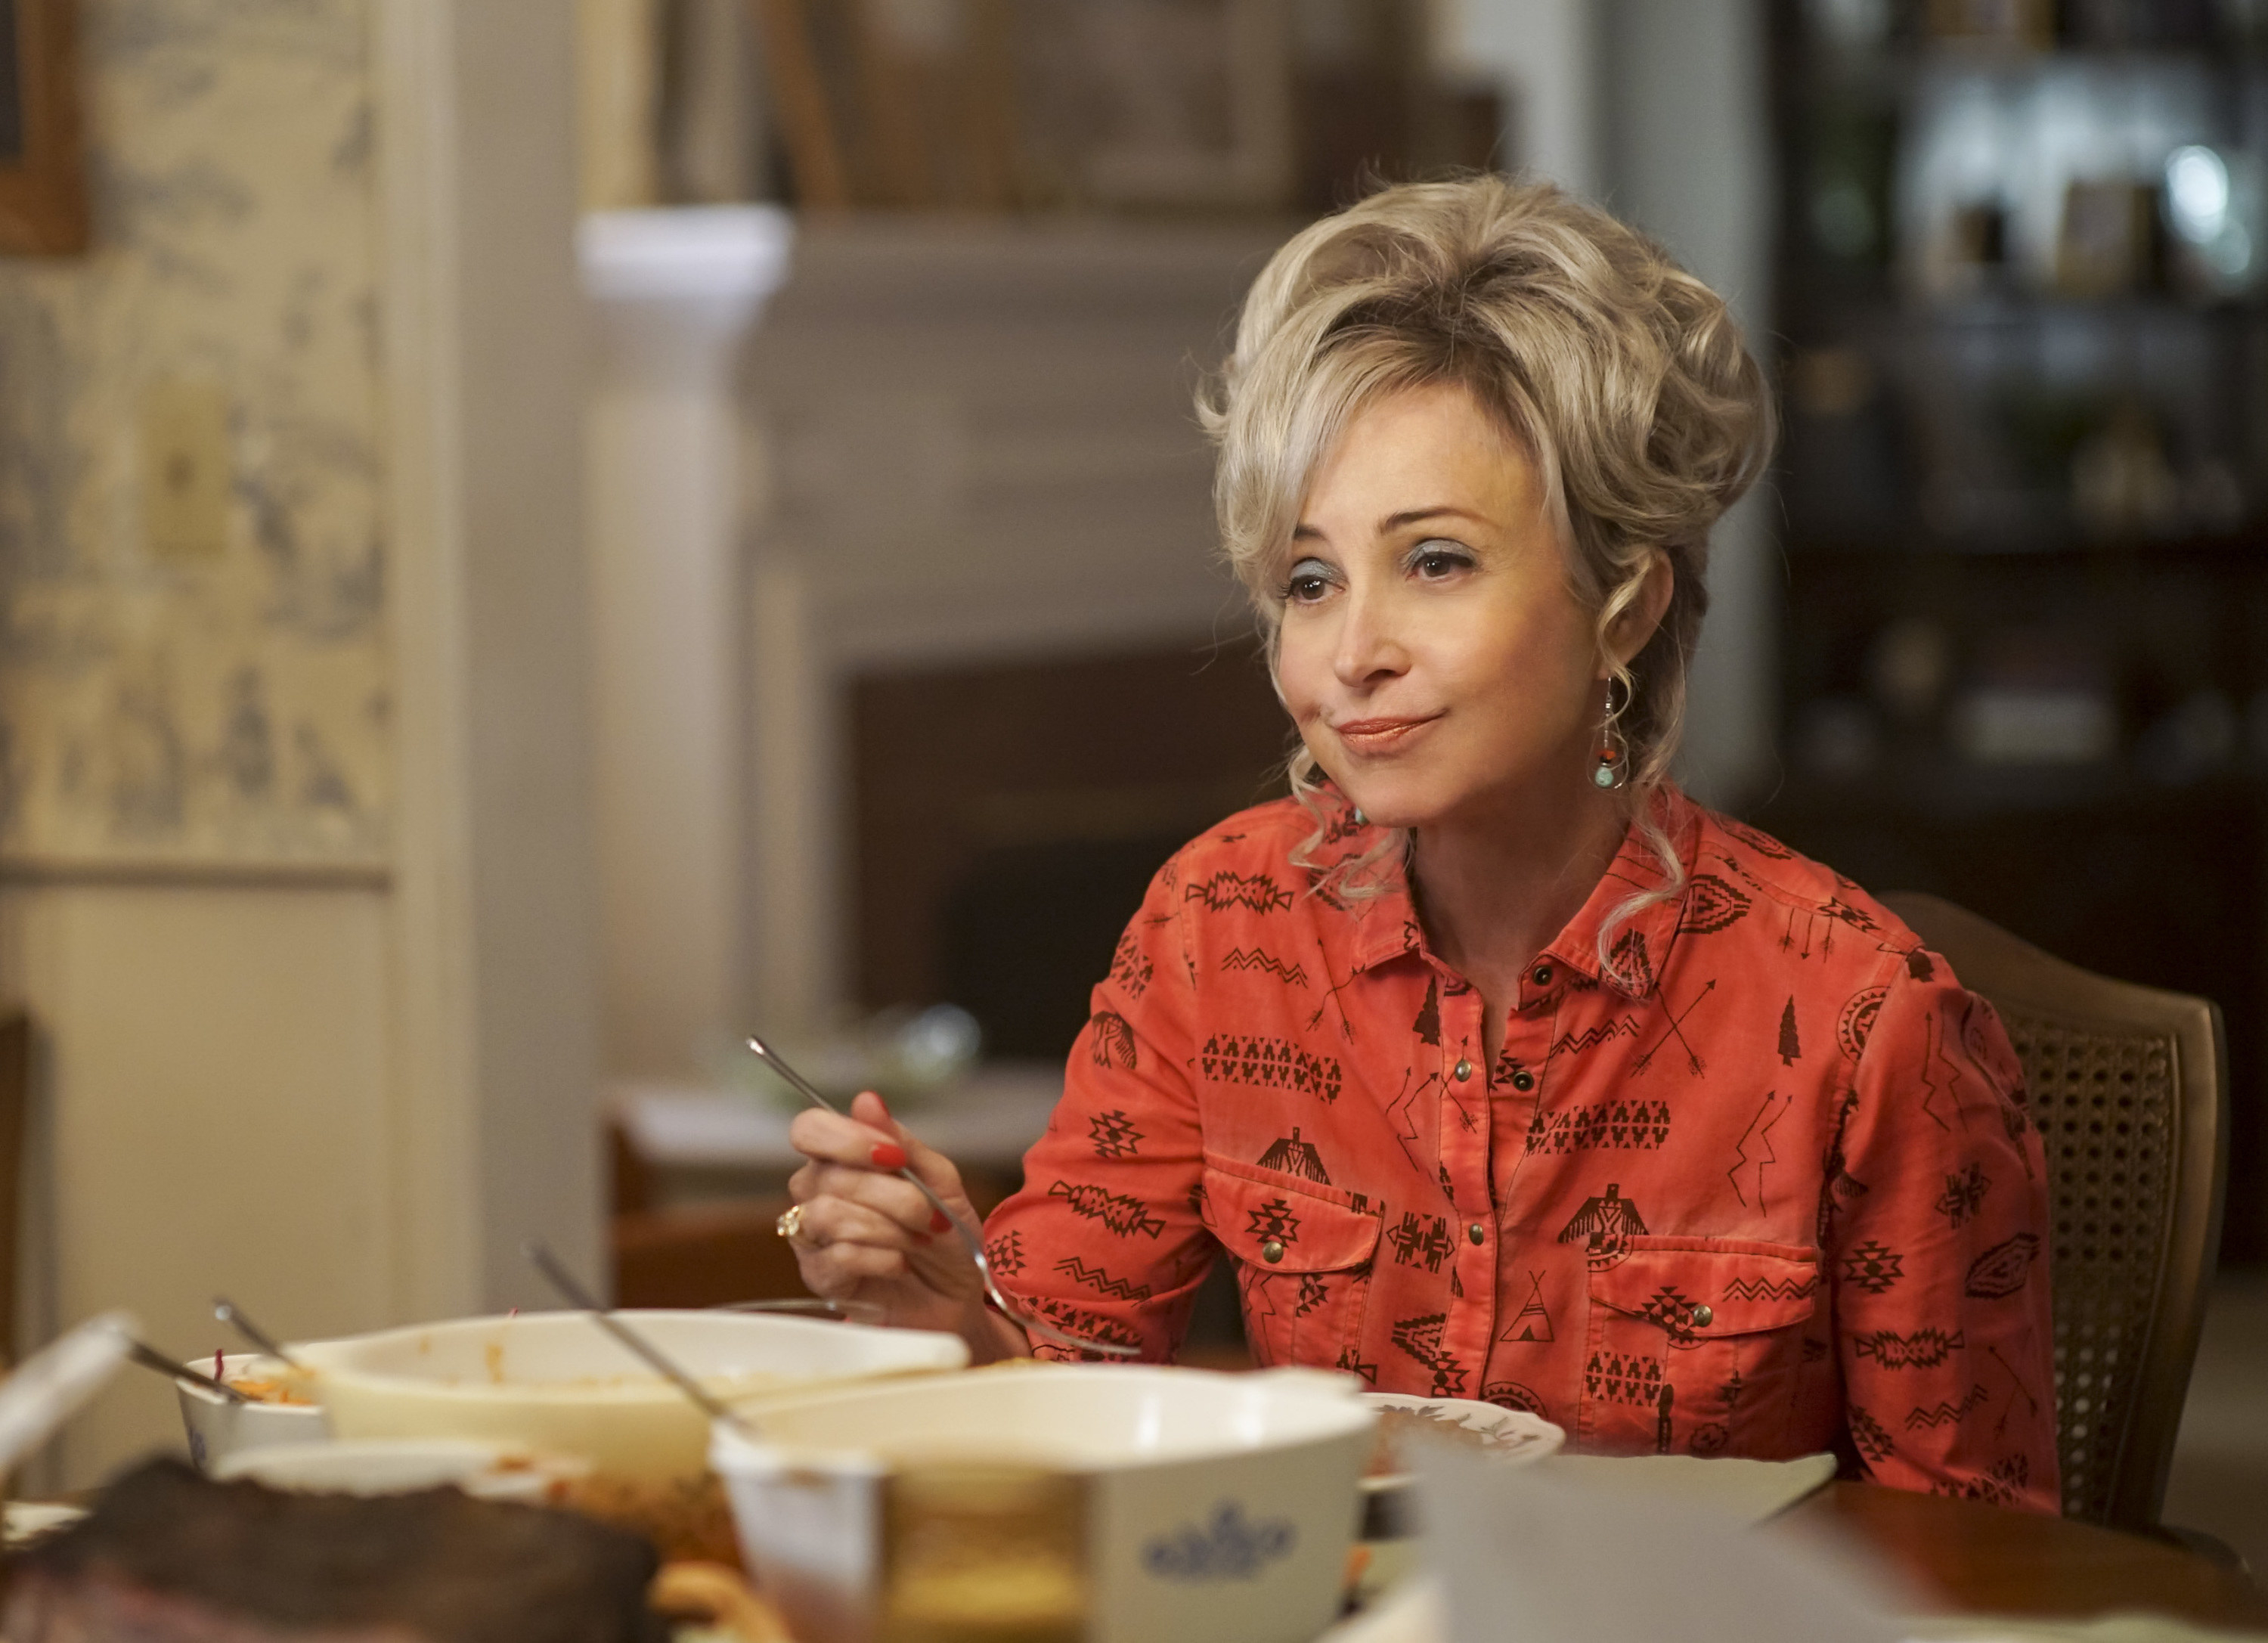 annie potts on young sheldon